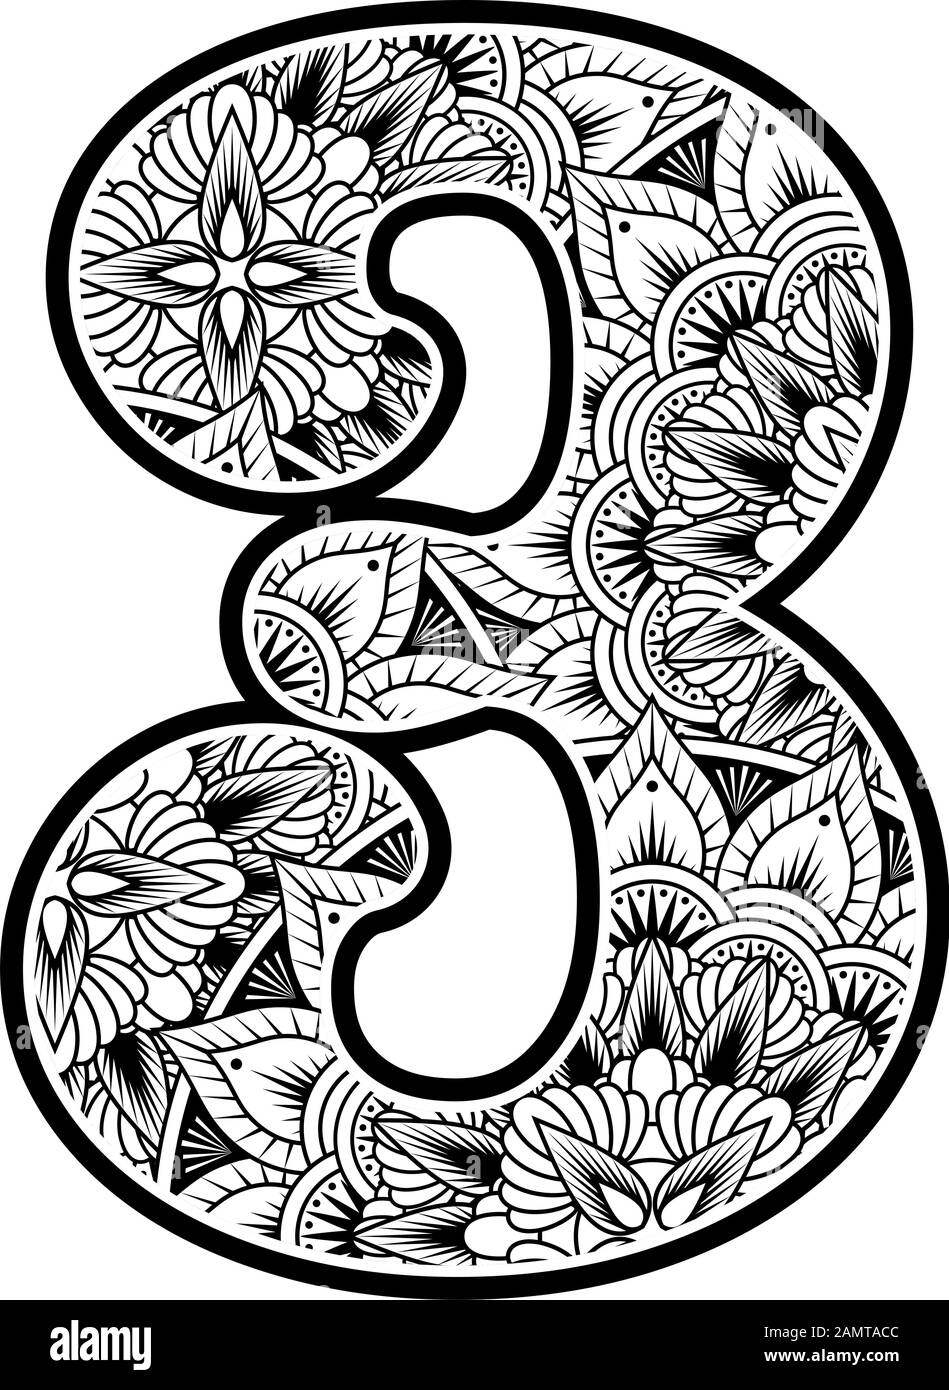 number 3 with abstract flowers ornaments in black and white. design inspired from mandala art style for coloring. Isolated on white background Stock Vector